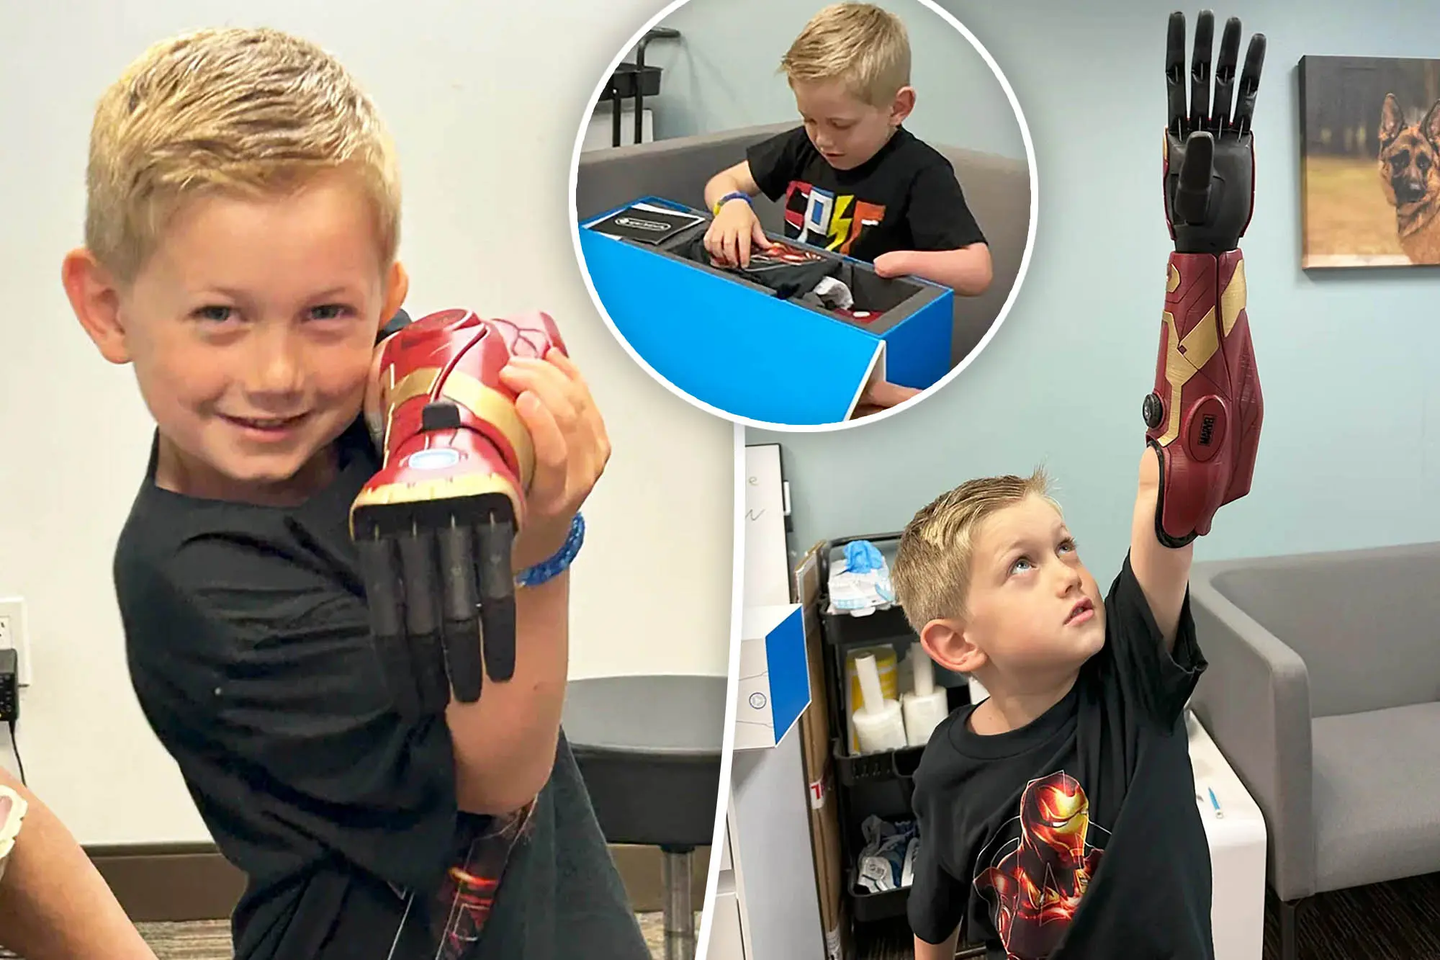 5 year-old boy is youngest ever to receive bionic arm: ‘I am Iron Man’